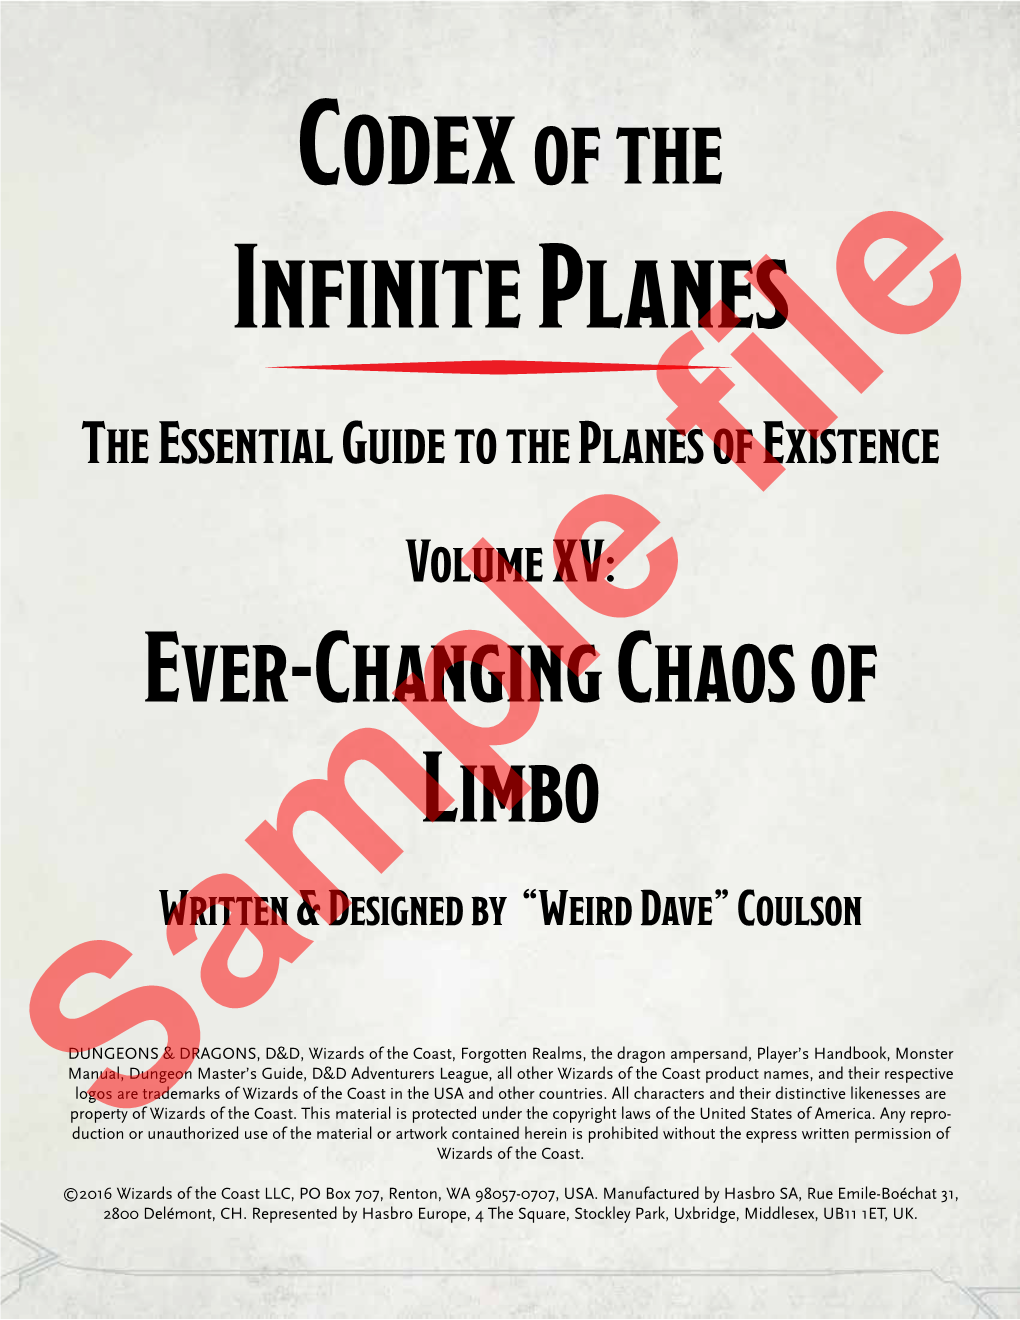 Ever-Changing Chaos of Limbo Written & Designed by “Weird Dave” Coulson